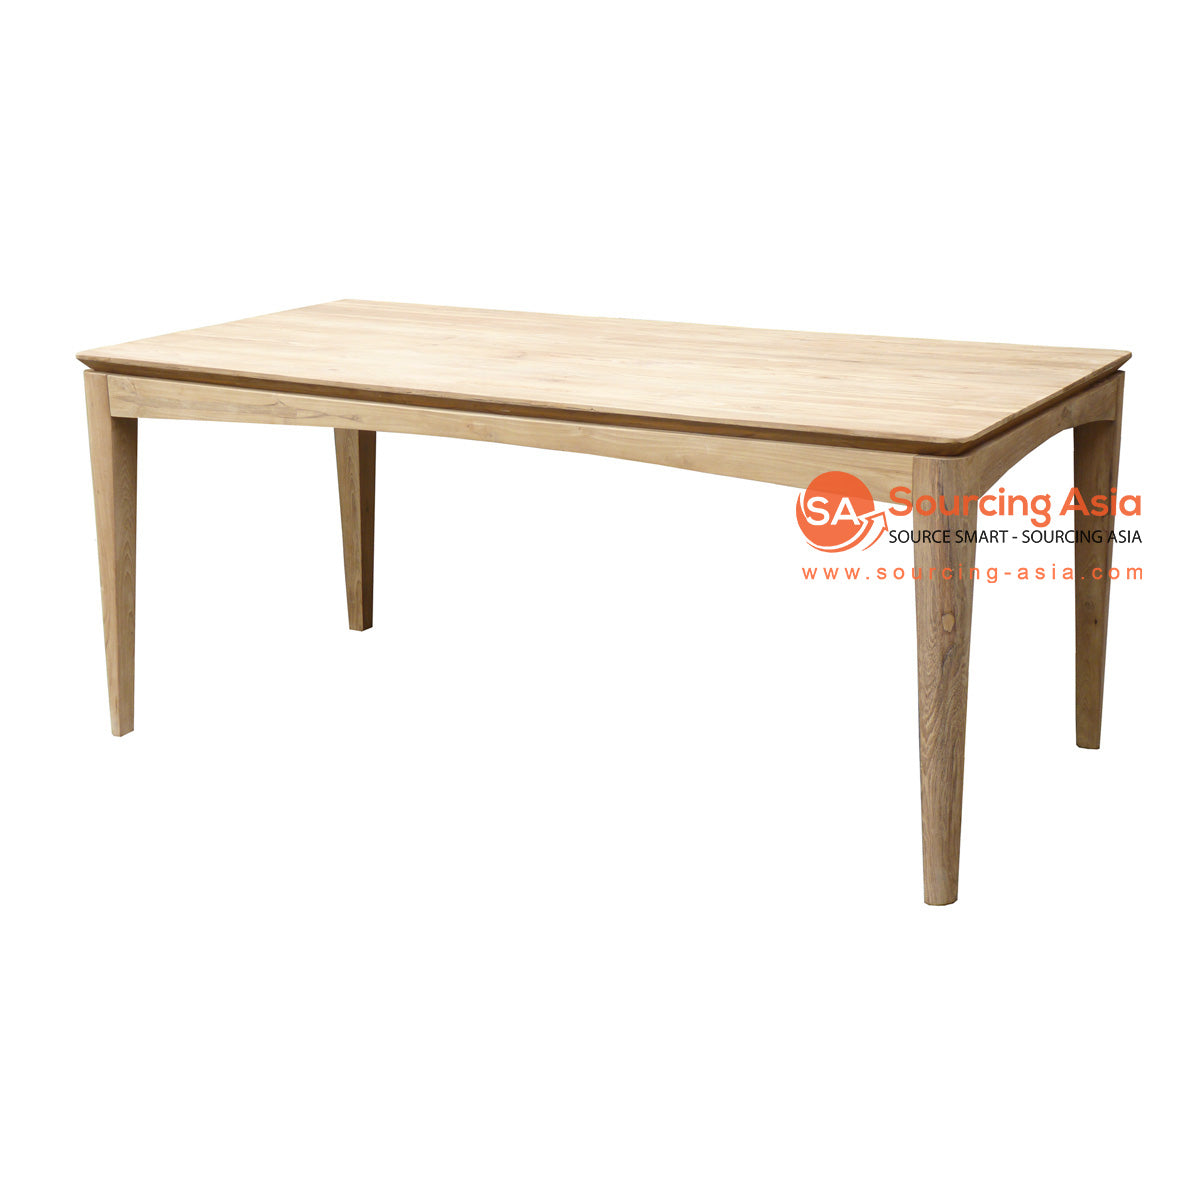 ECL311 NATURAL RECYCLED TEAK WOOD HAVANA DINING TABLE